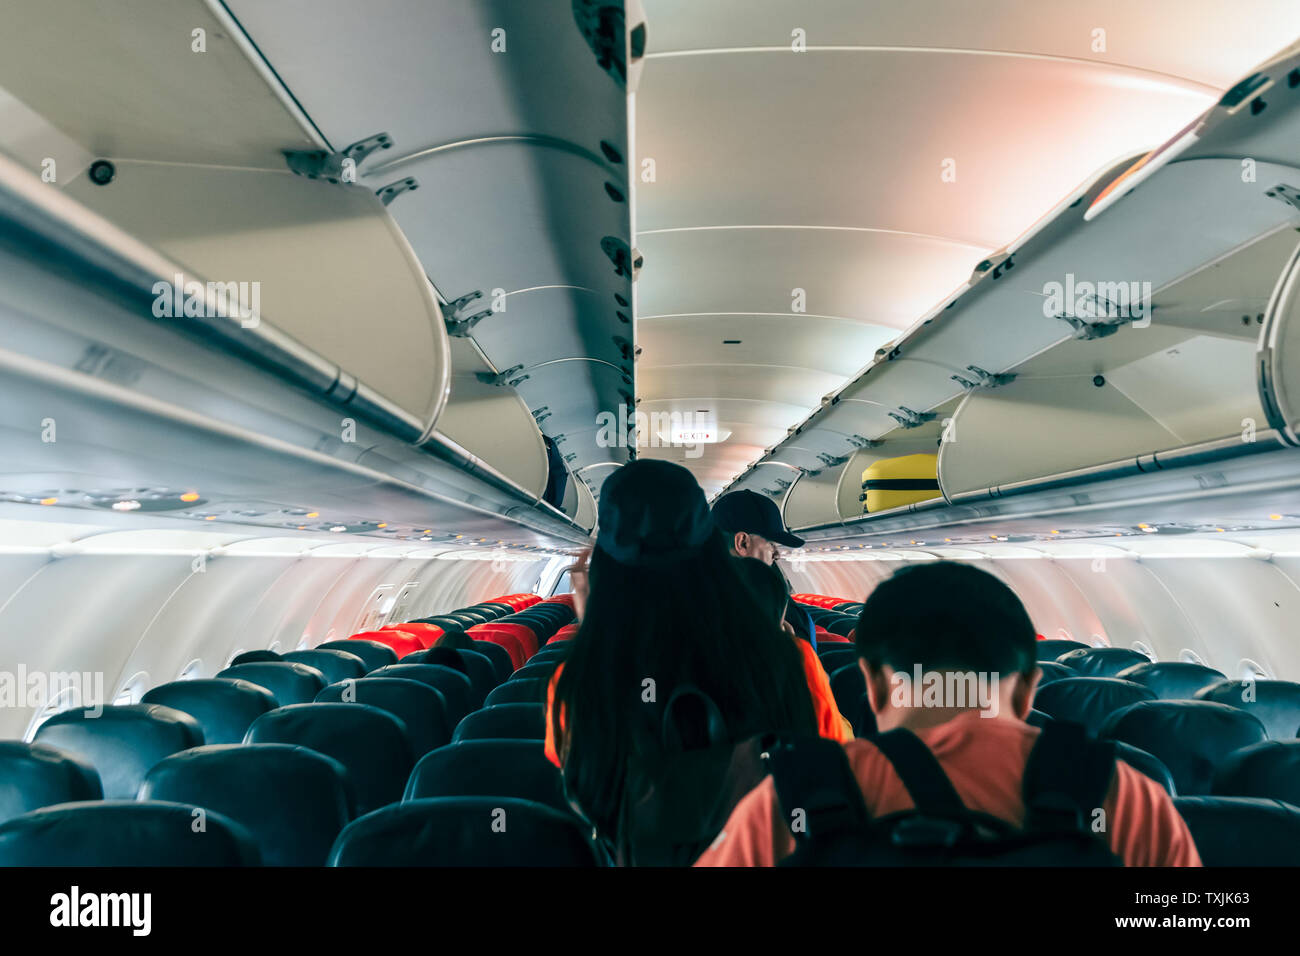 Unspecified passengers were walking out of the plane following the exit sign Stock Photo